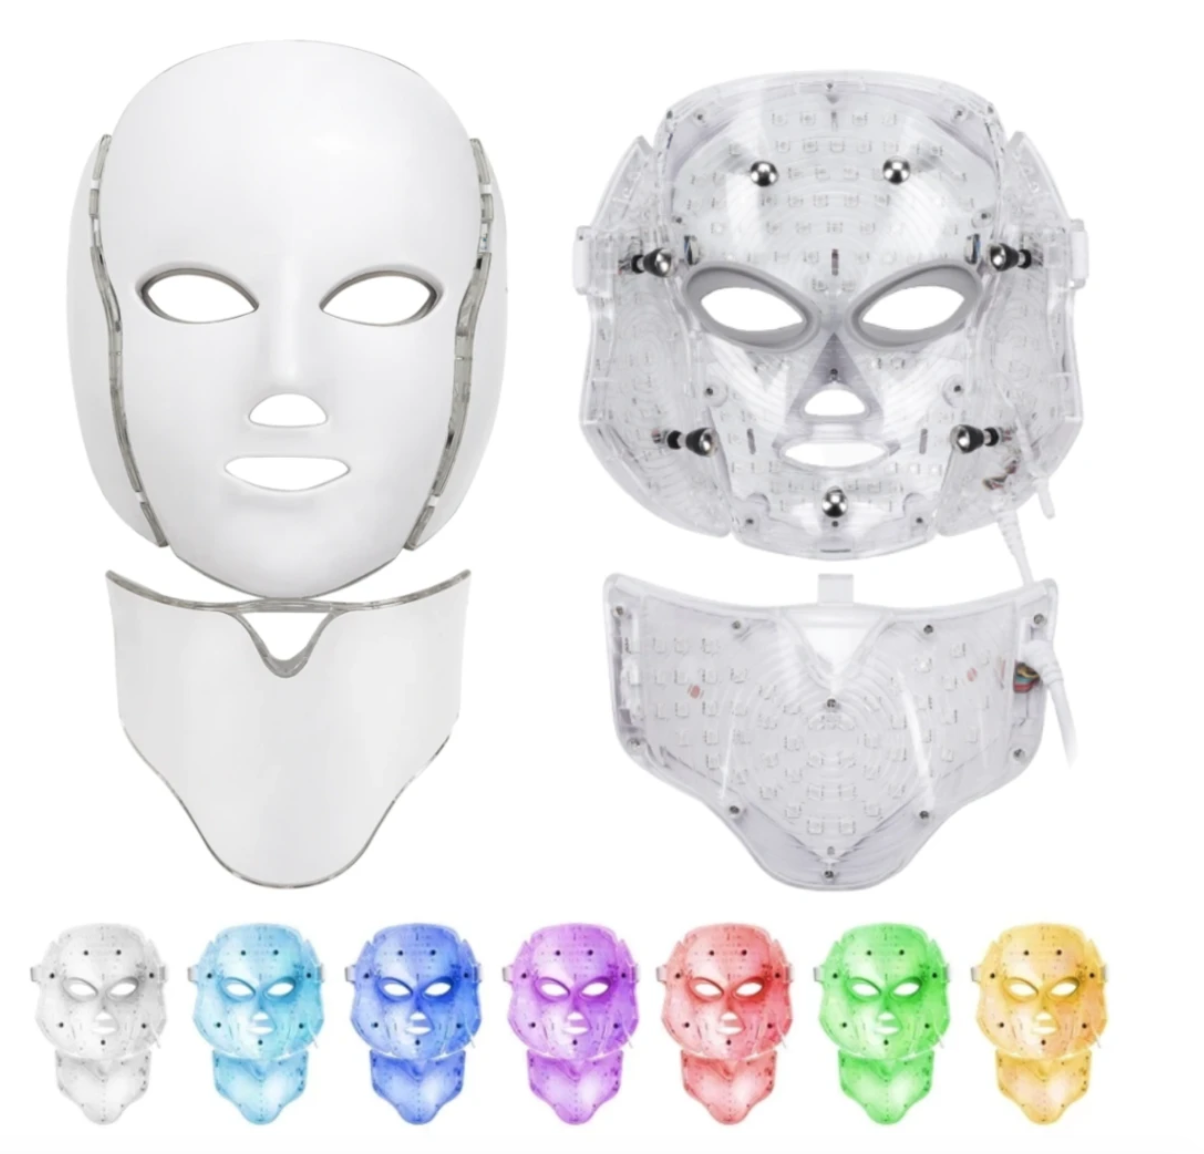 Led Light Therapy Mask